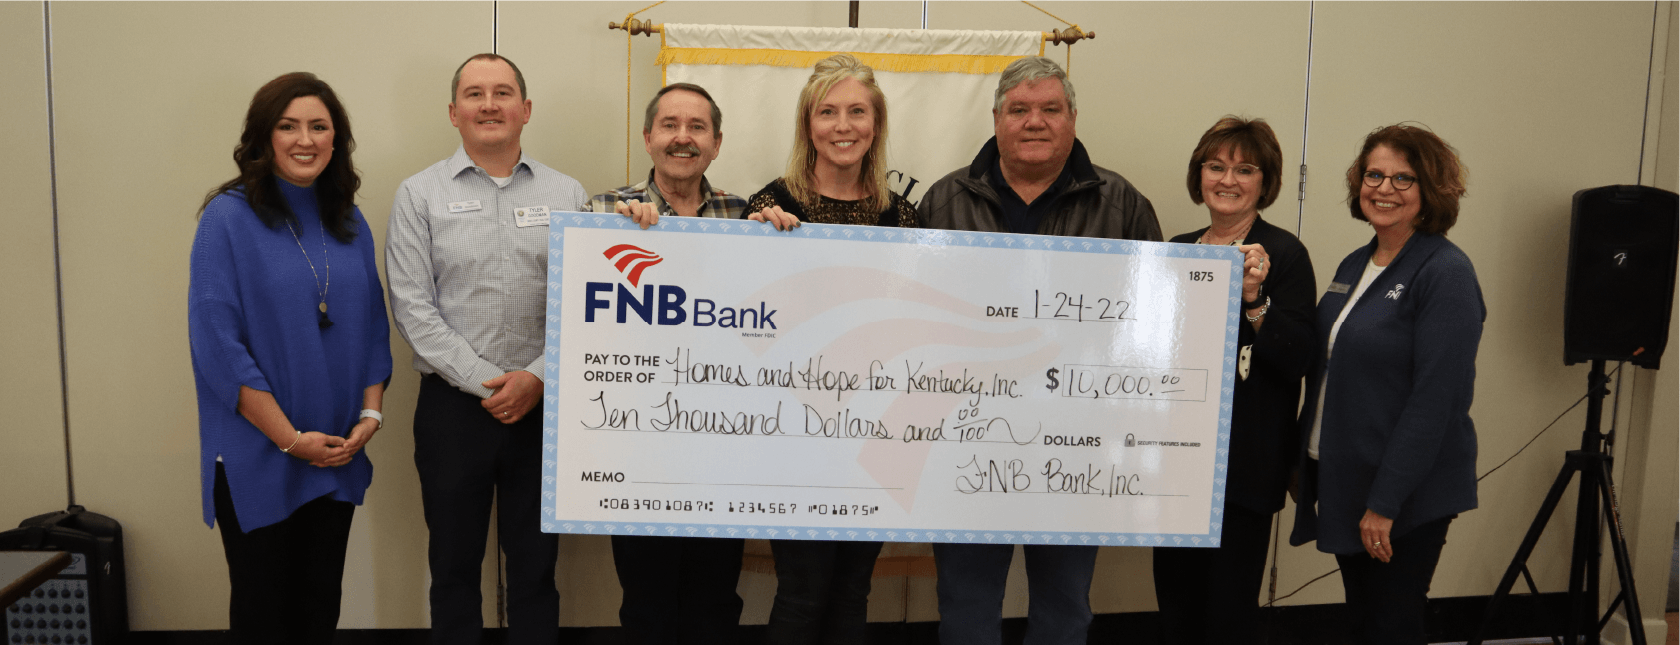 FNB MAKES $10,000 INVESTMENT TO HOMES AND HOPE FOR KENTUCKY